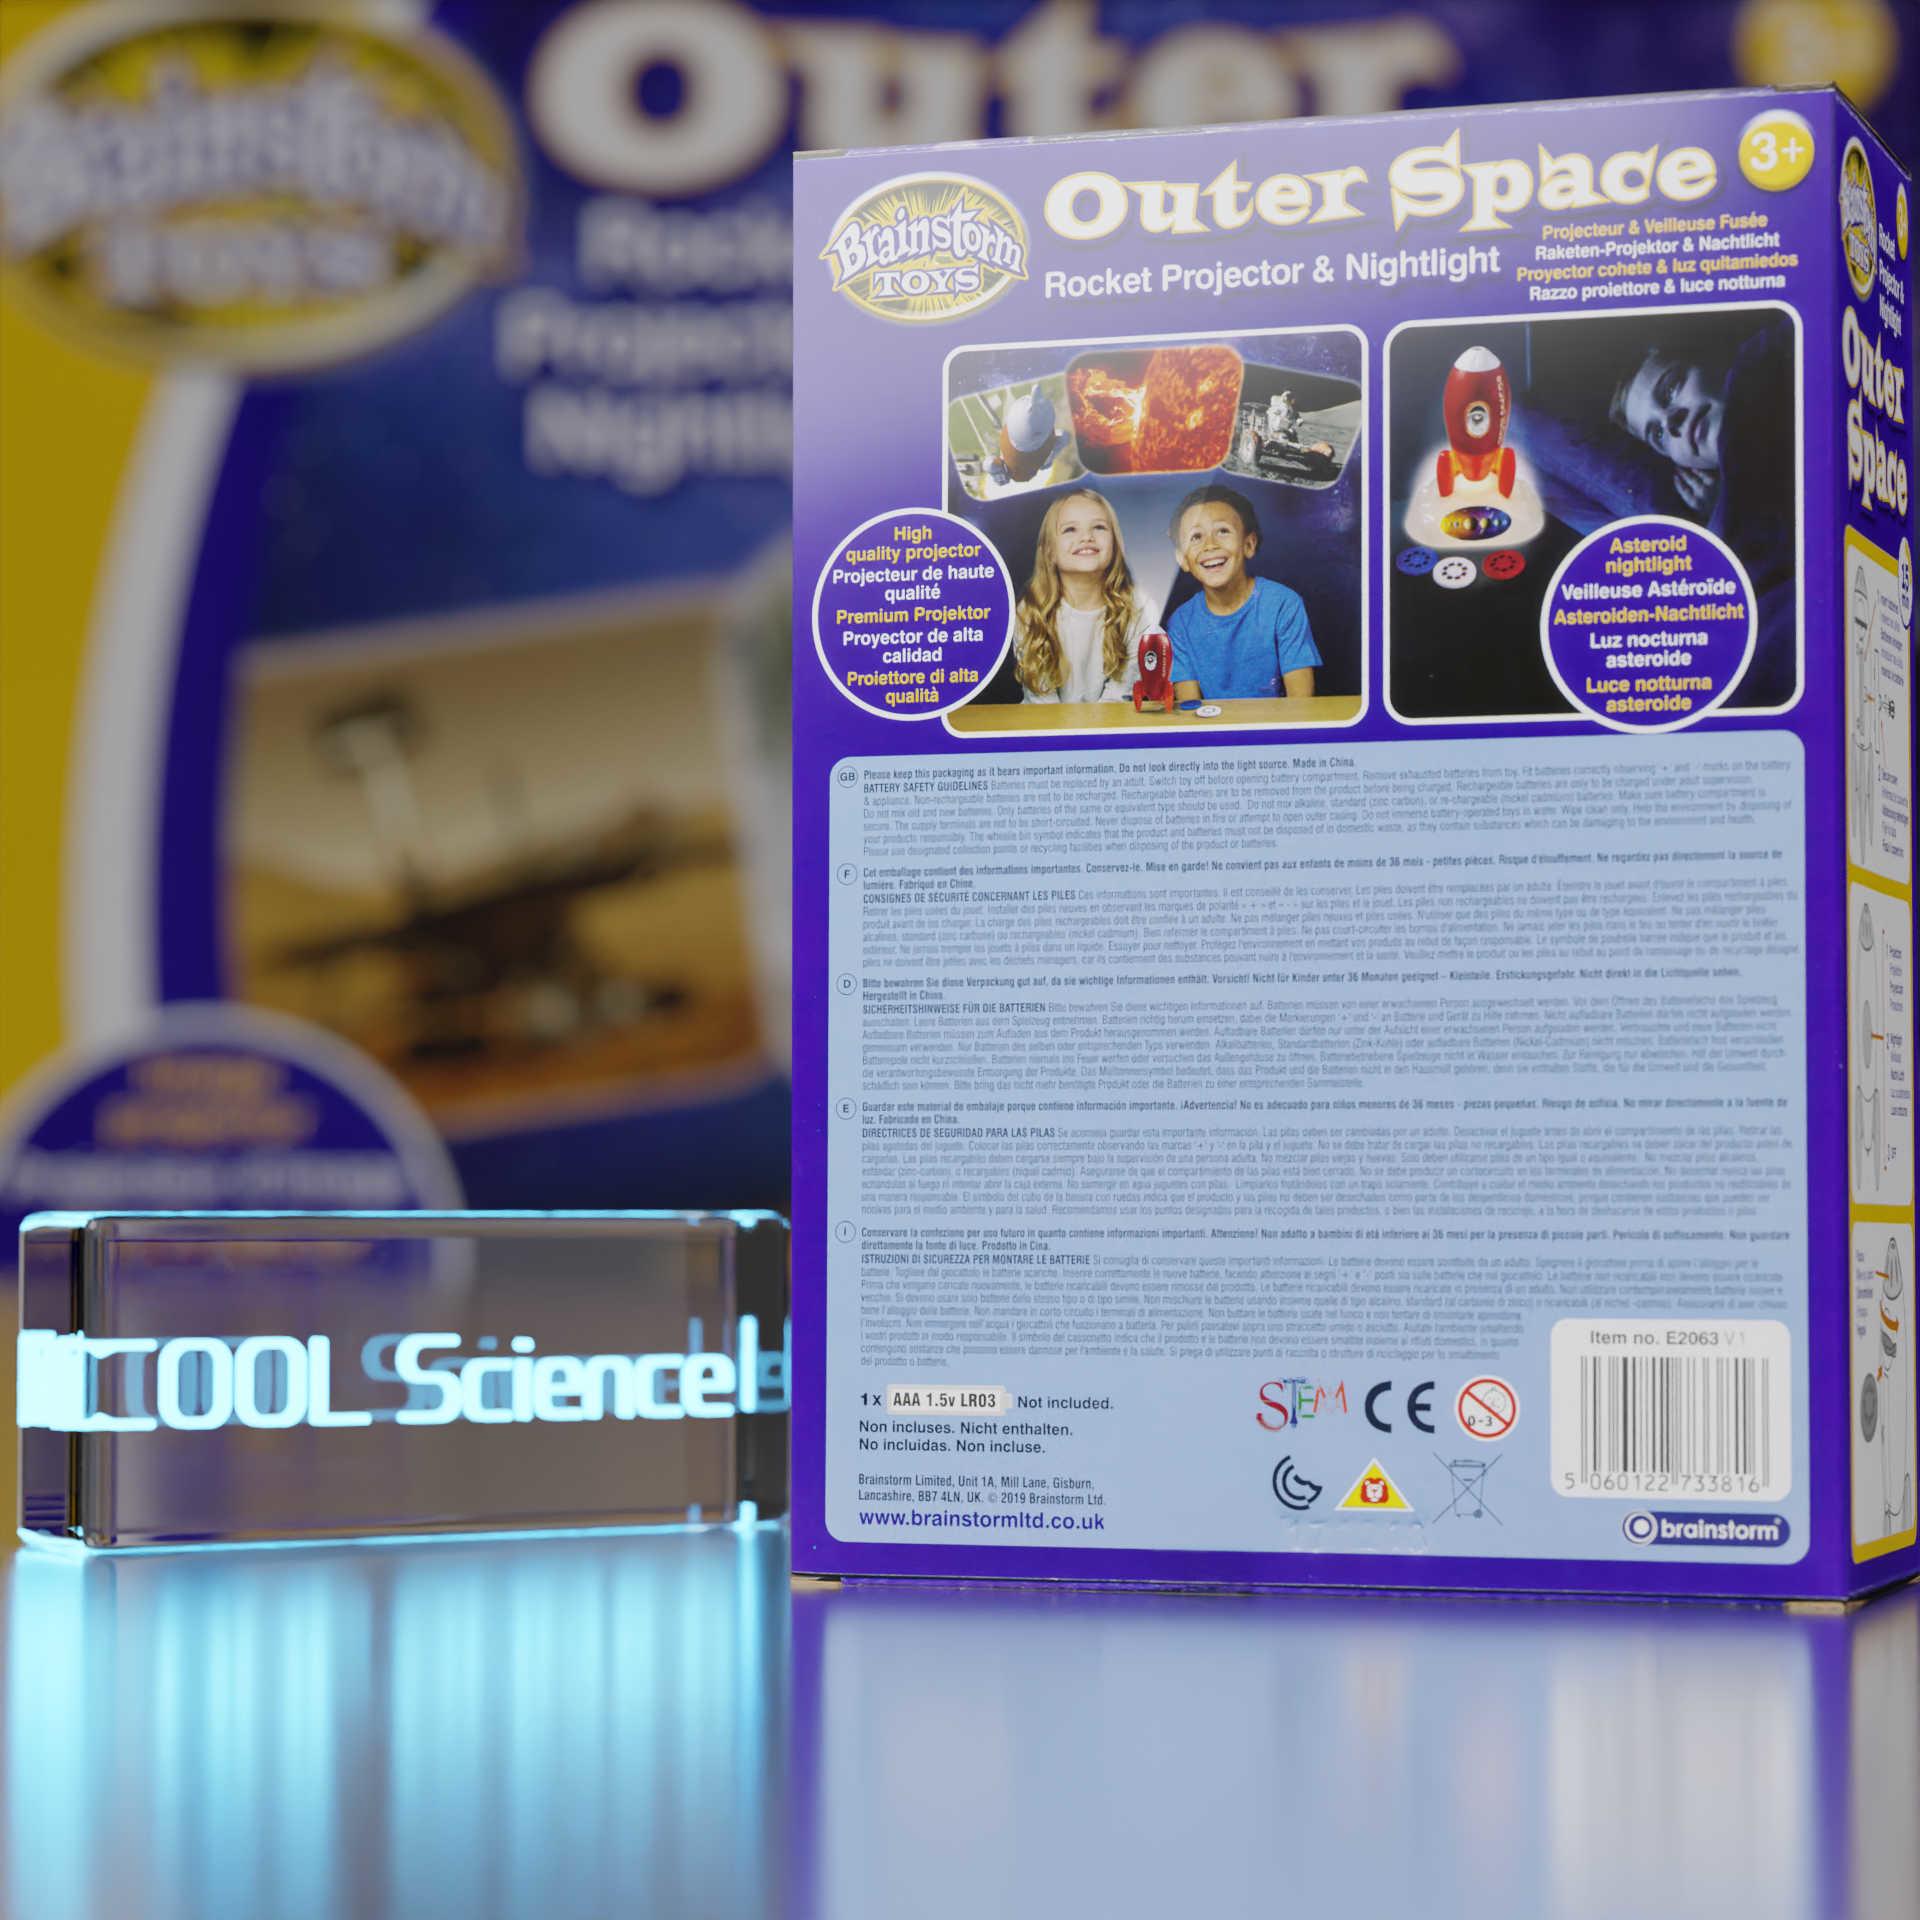 Back View of the Brainstorm Toys Outer Space Rocket Projector & Nightlight box